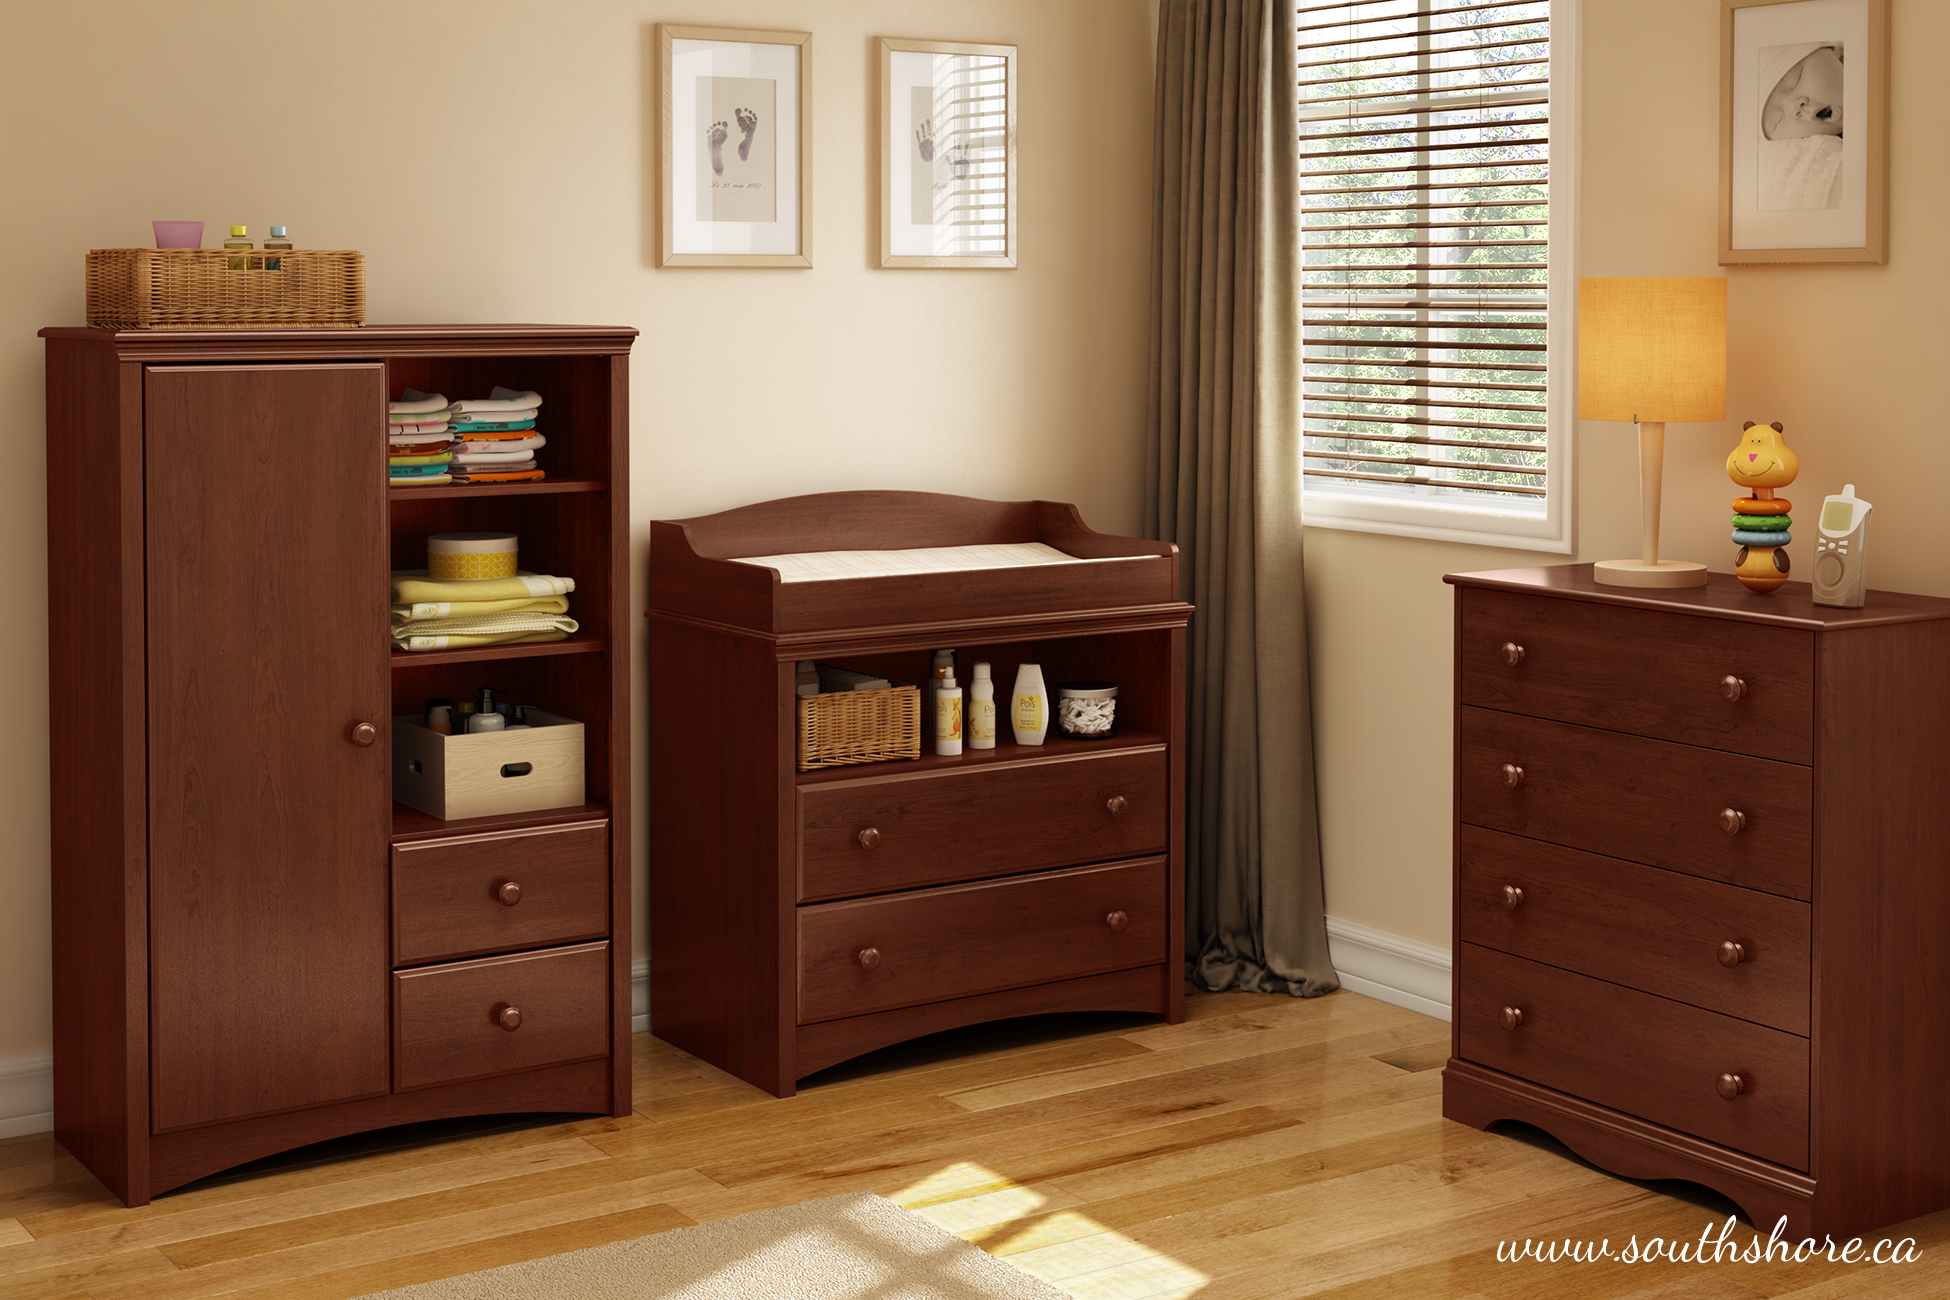 South Shore Sweet Morning Wood Changing Table in Royal Cherry Finish - image 4 of 6